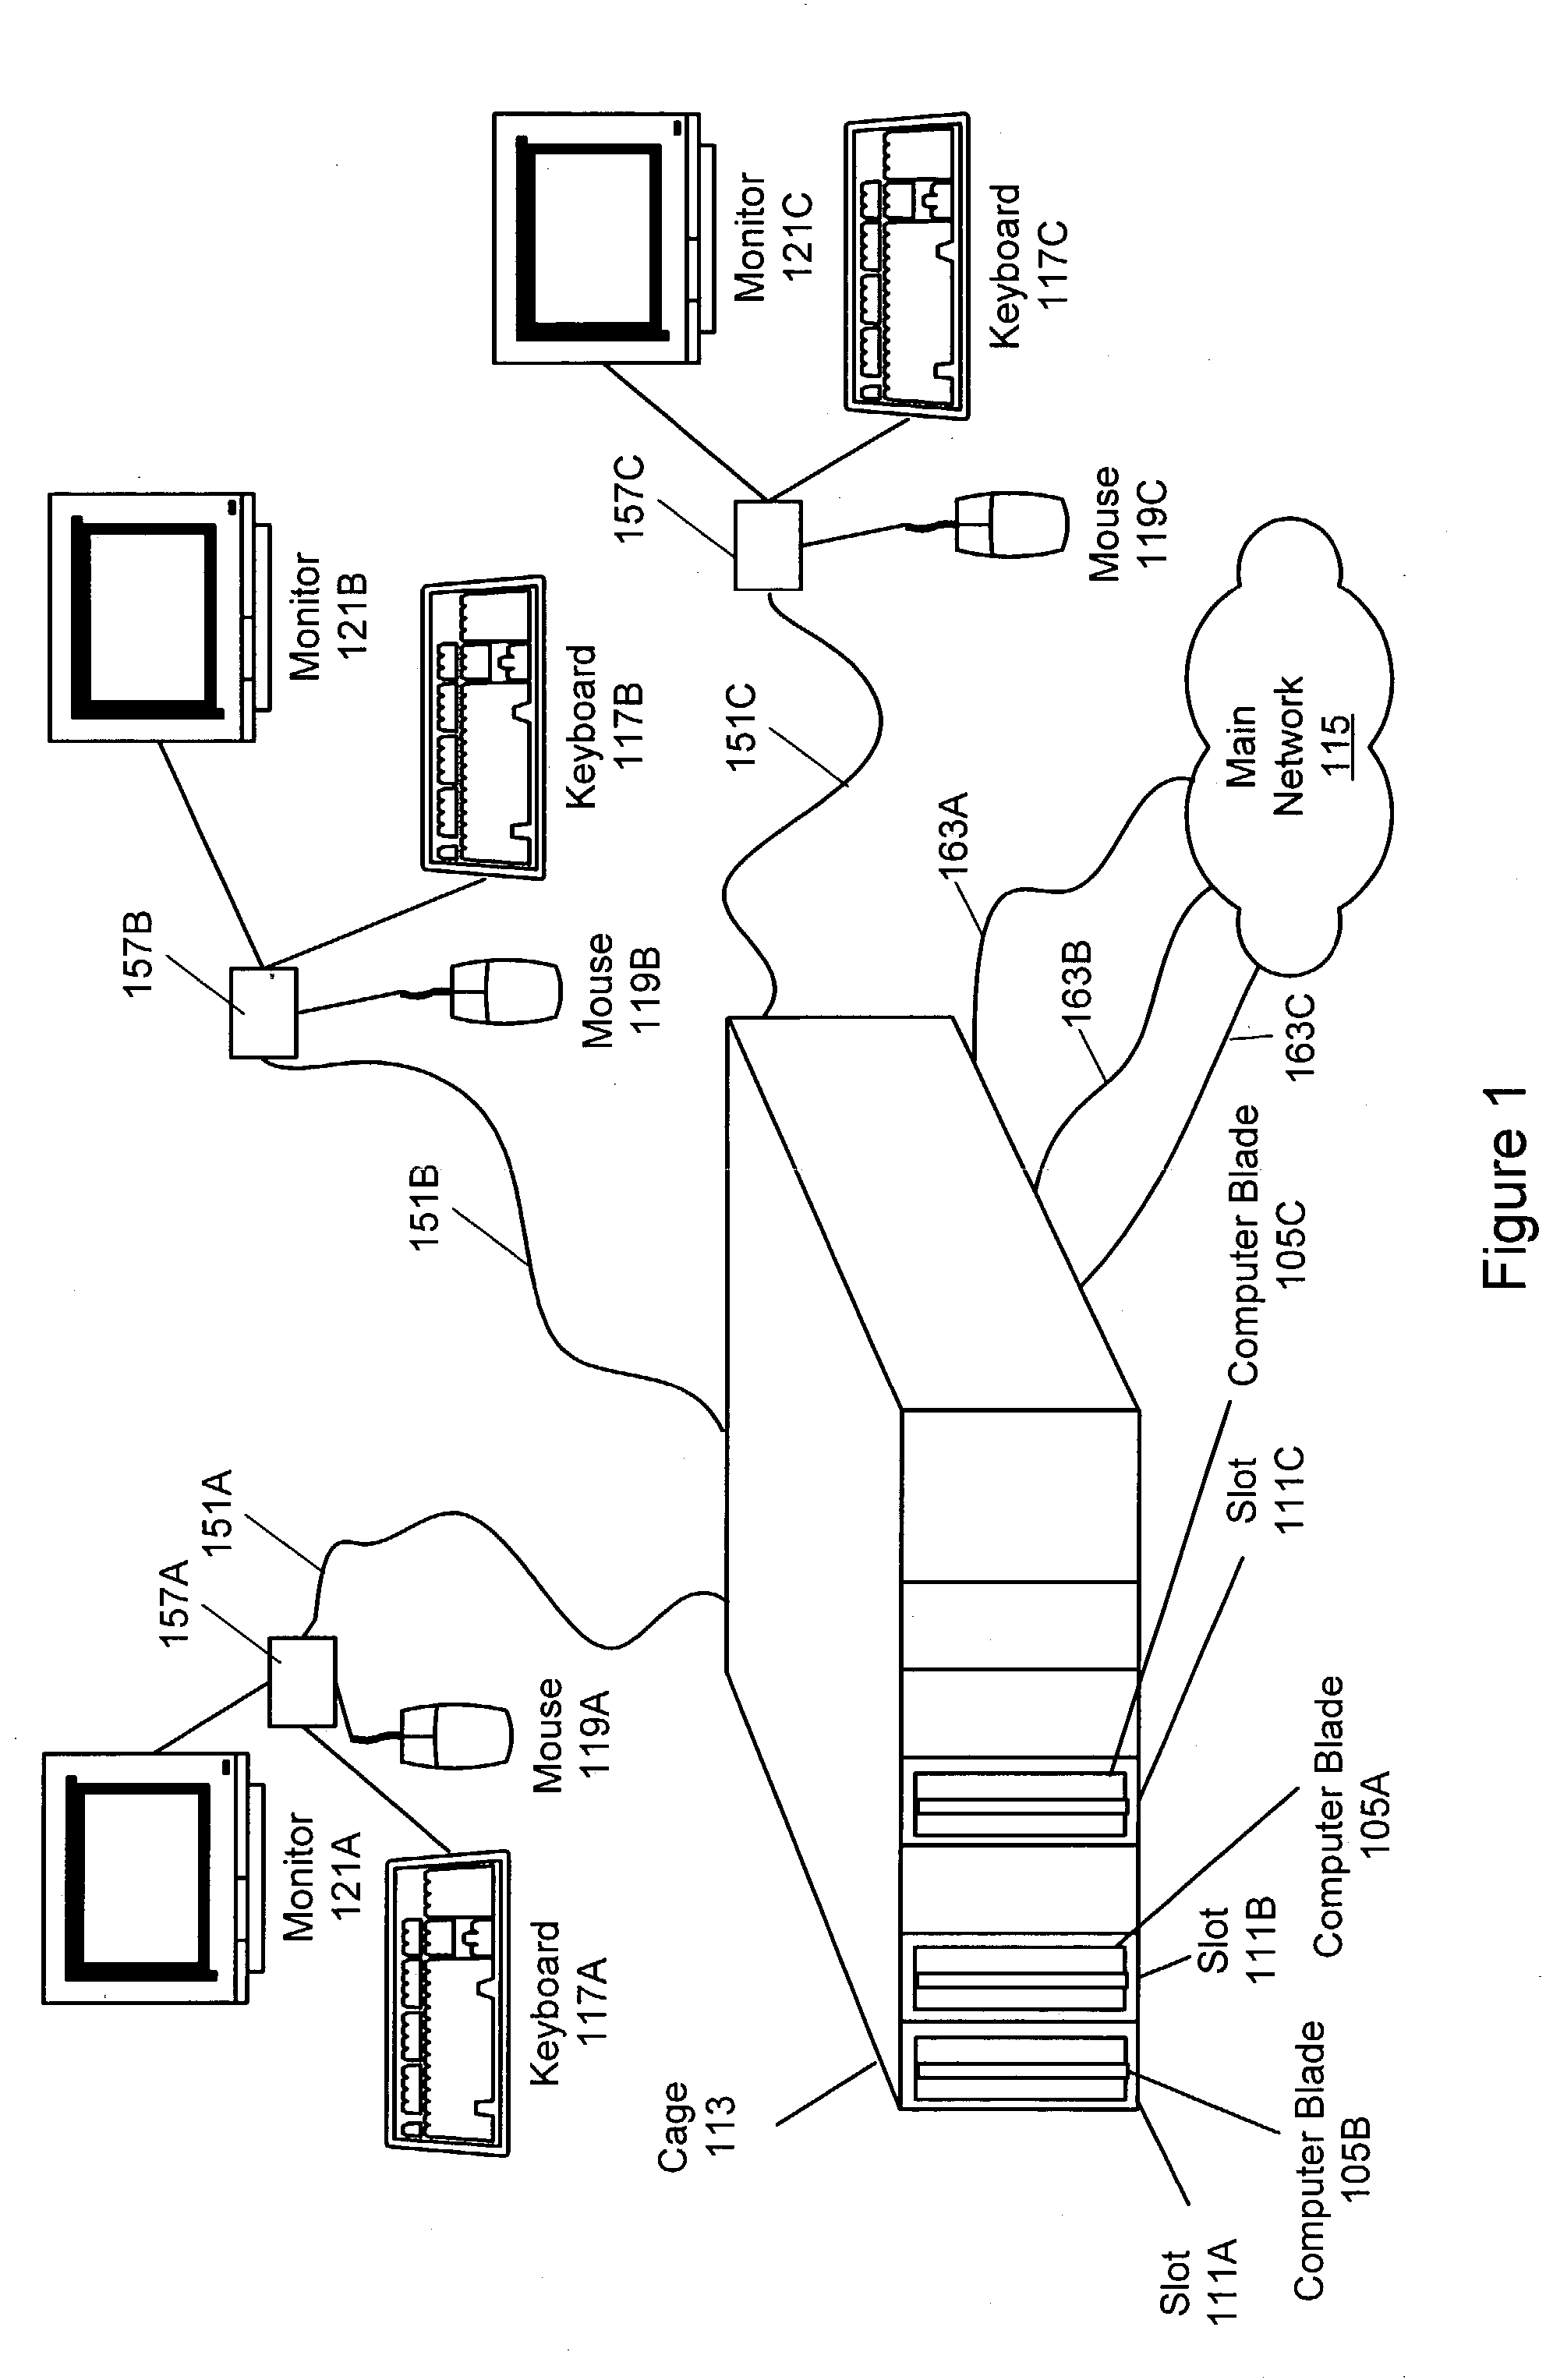 Computer condition detection system